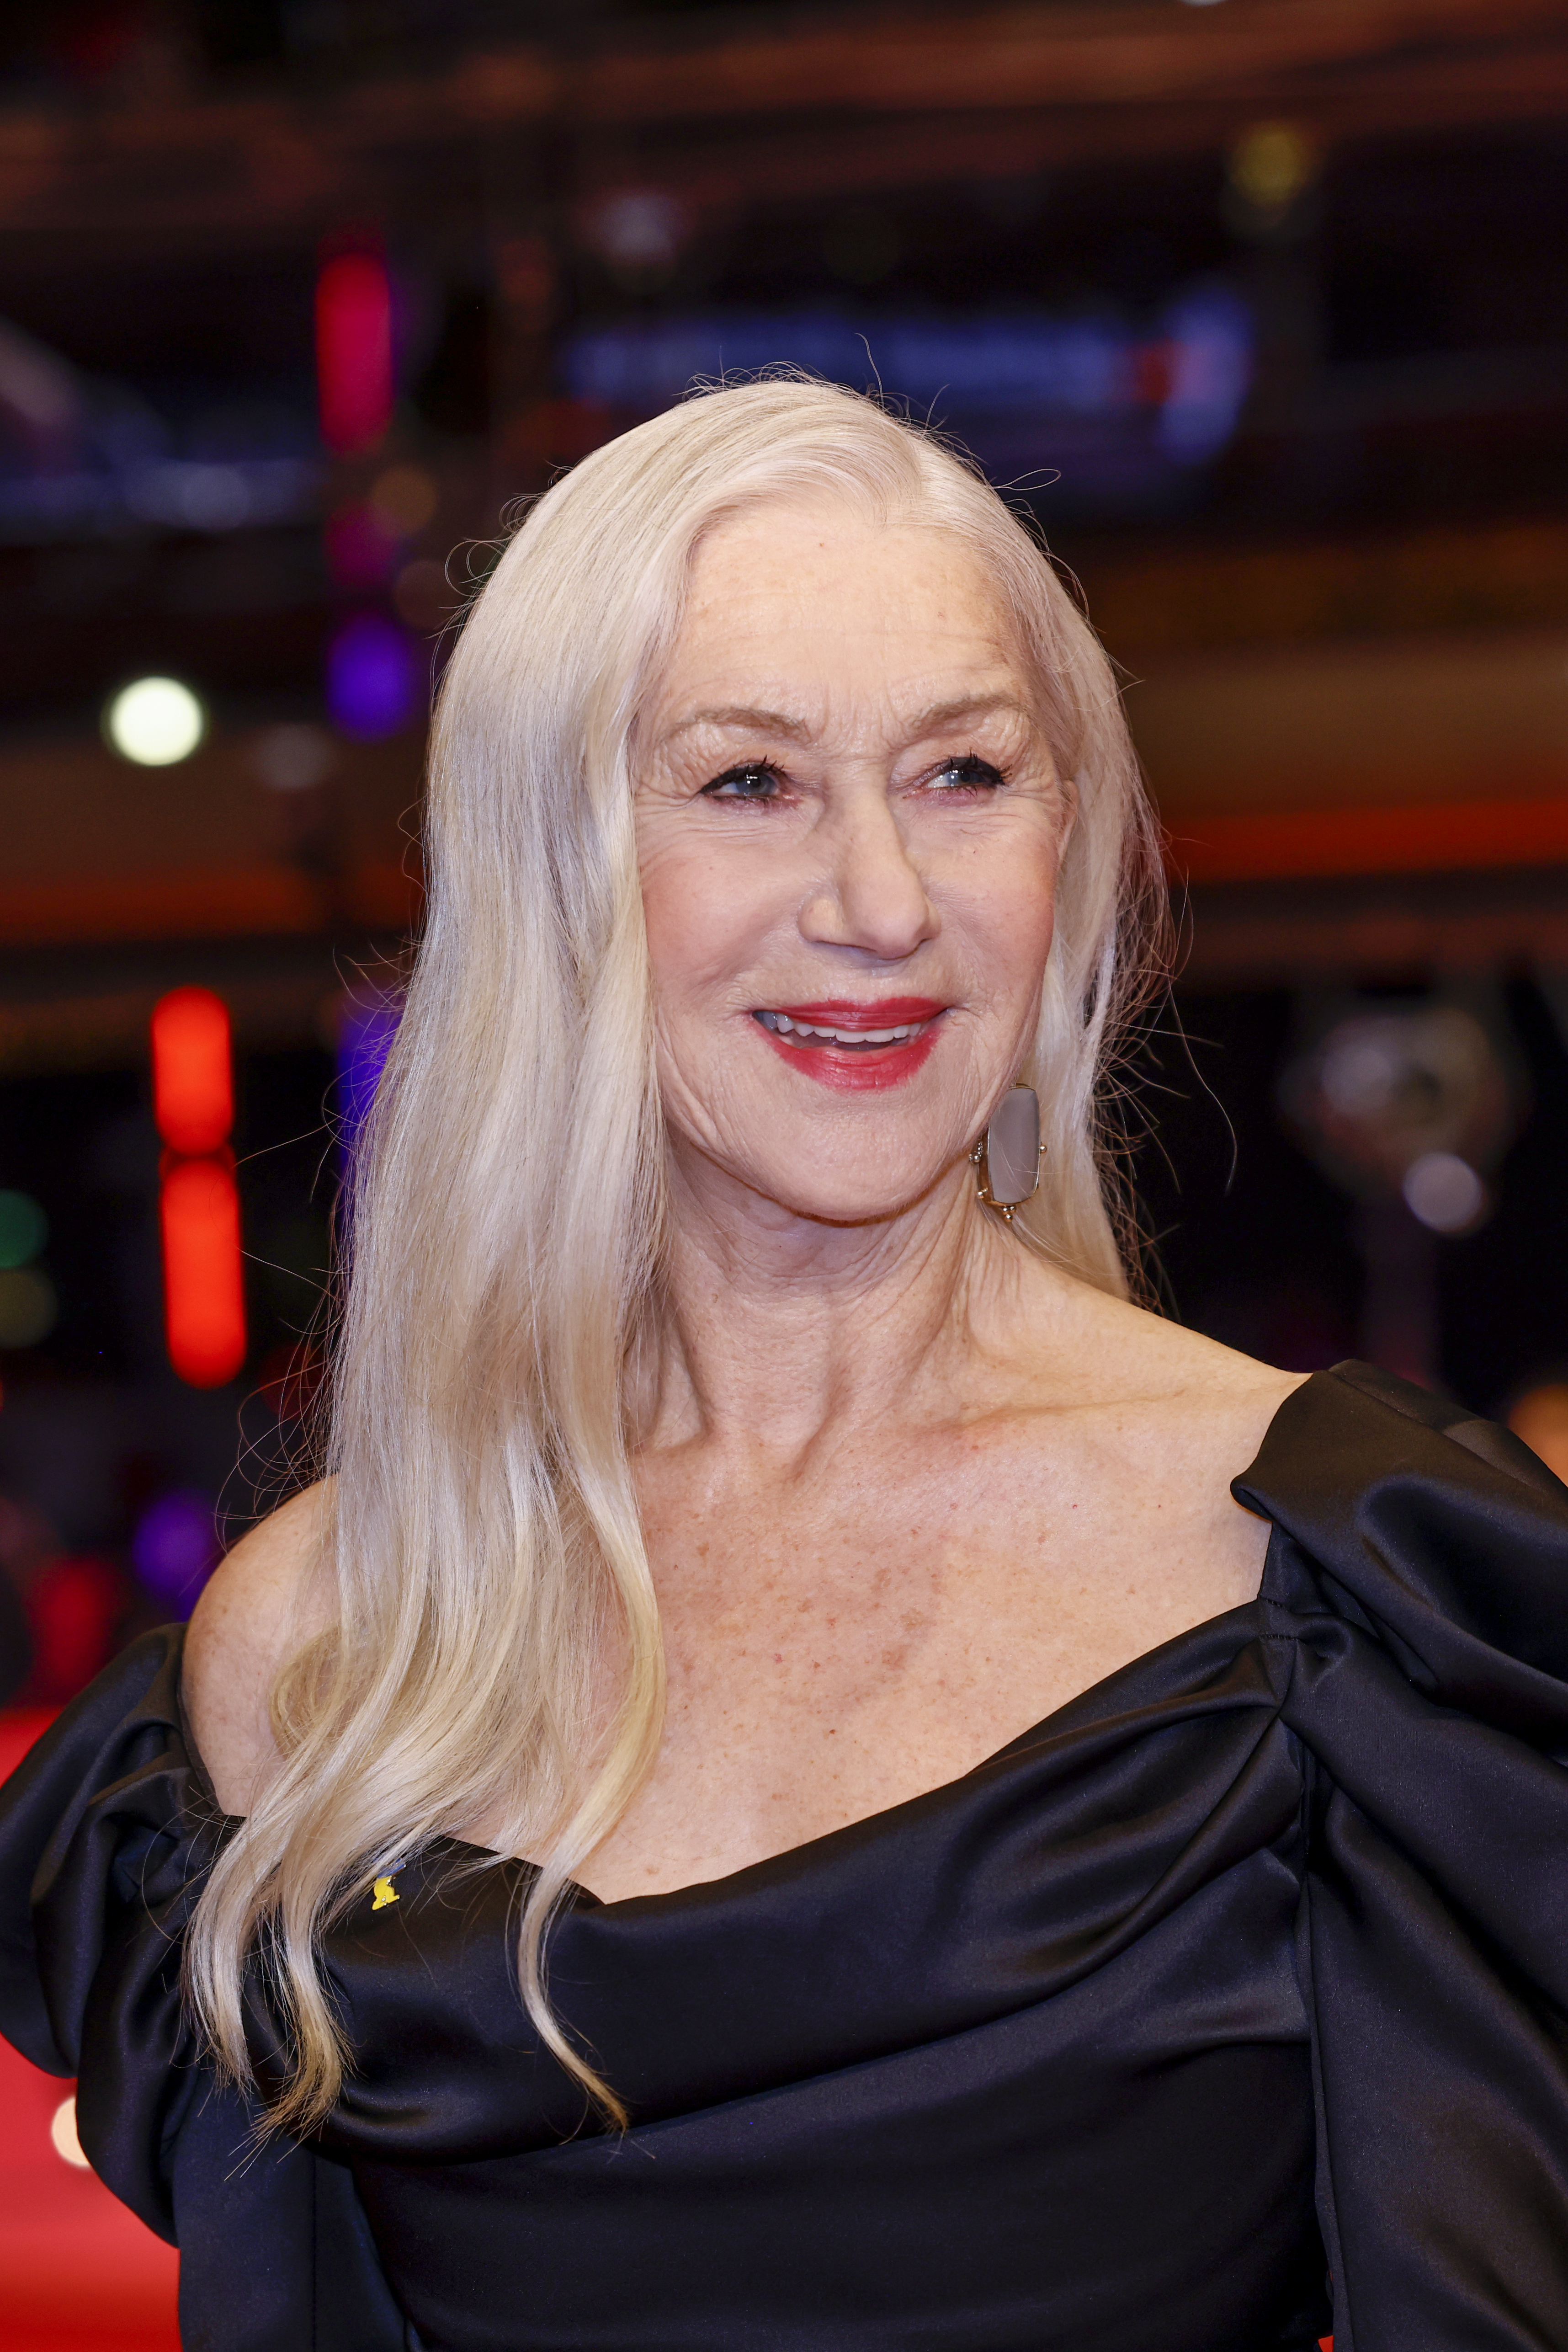 US actress Helen Mirren at the "Golda" premiere and European Shooting Stars 2023 red carpet during the 73rd Berlinale International Film Festival Berlin at Berlinale Palast on February 20, 2023 in Berlin, Germany. | Source: Getty Images